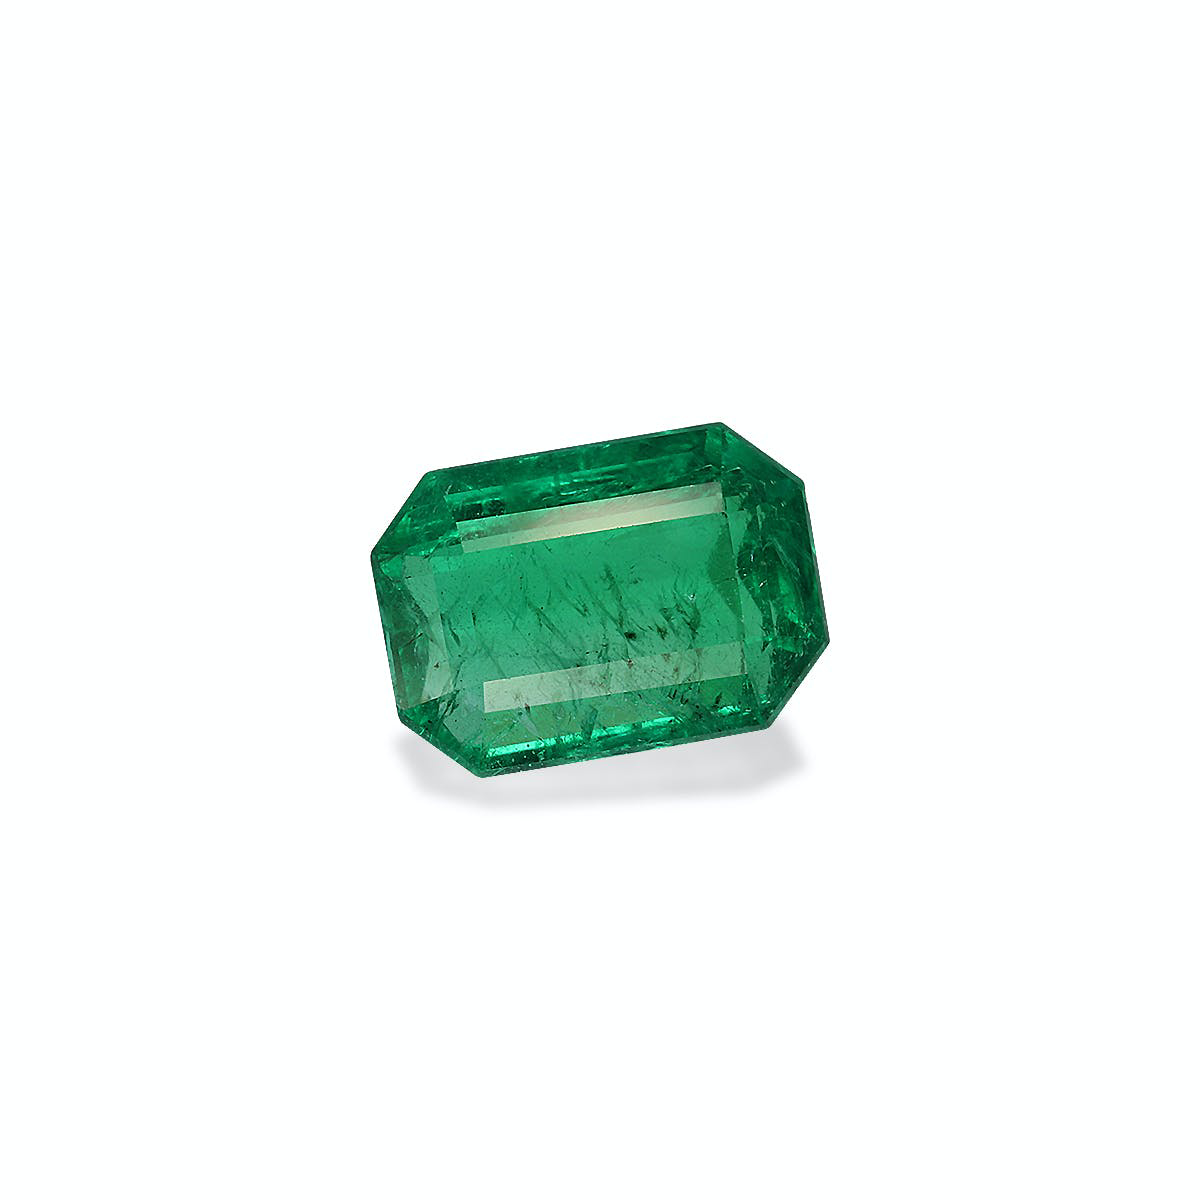 Picture of Green Zambian Emerald 1.89ct - 8x6mm (PG0336)